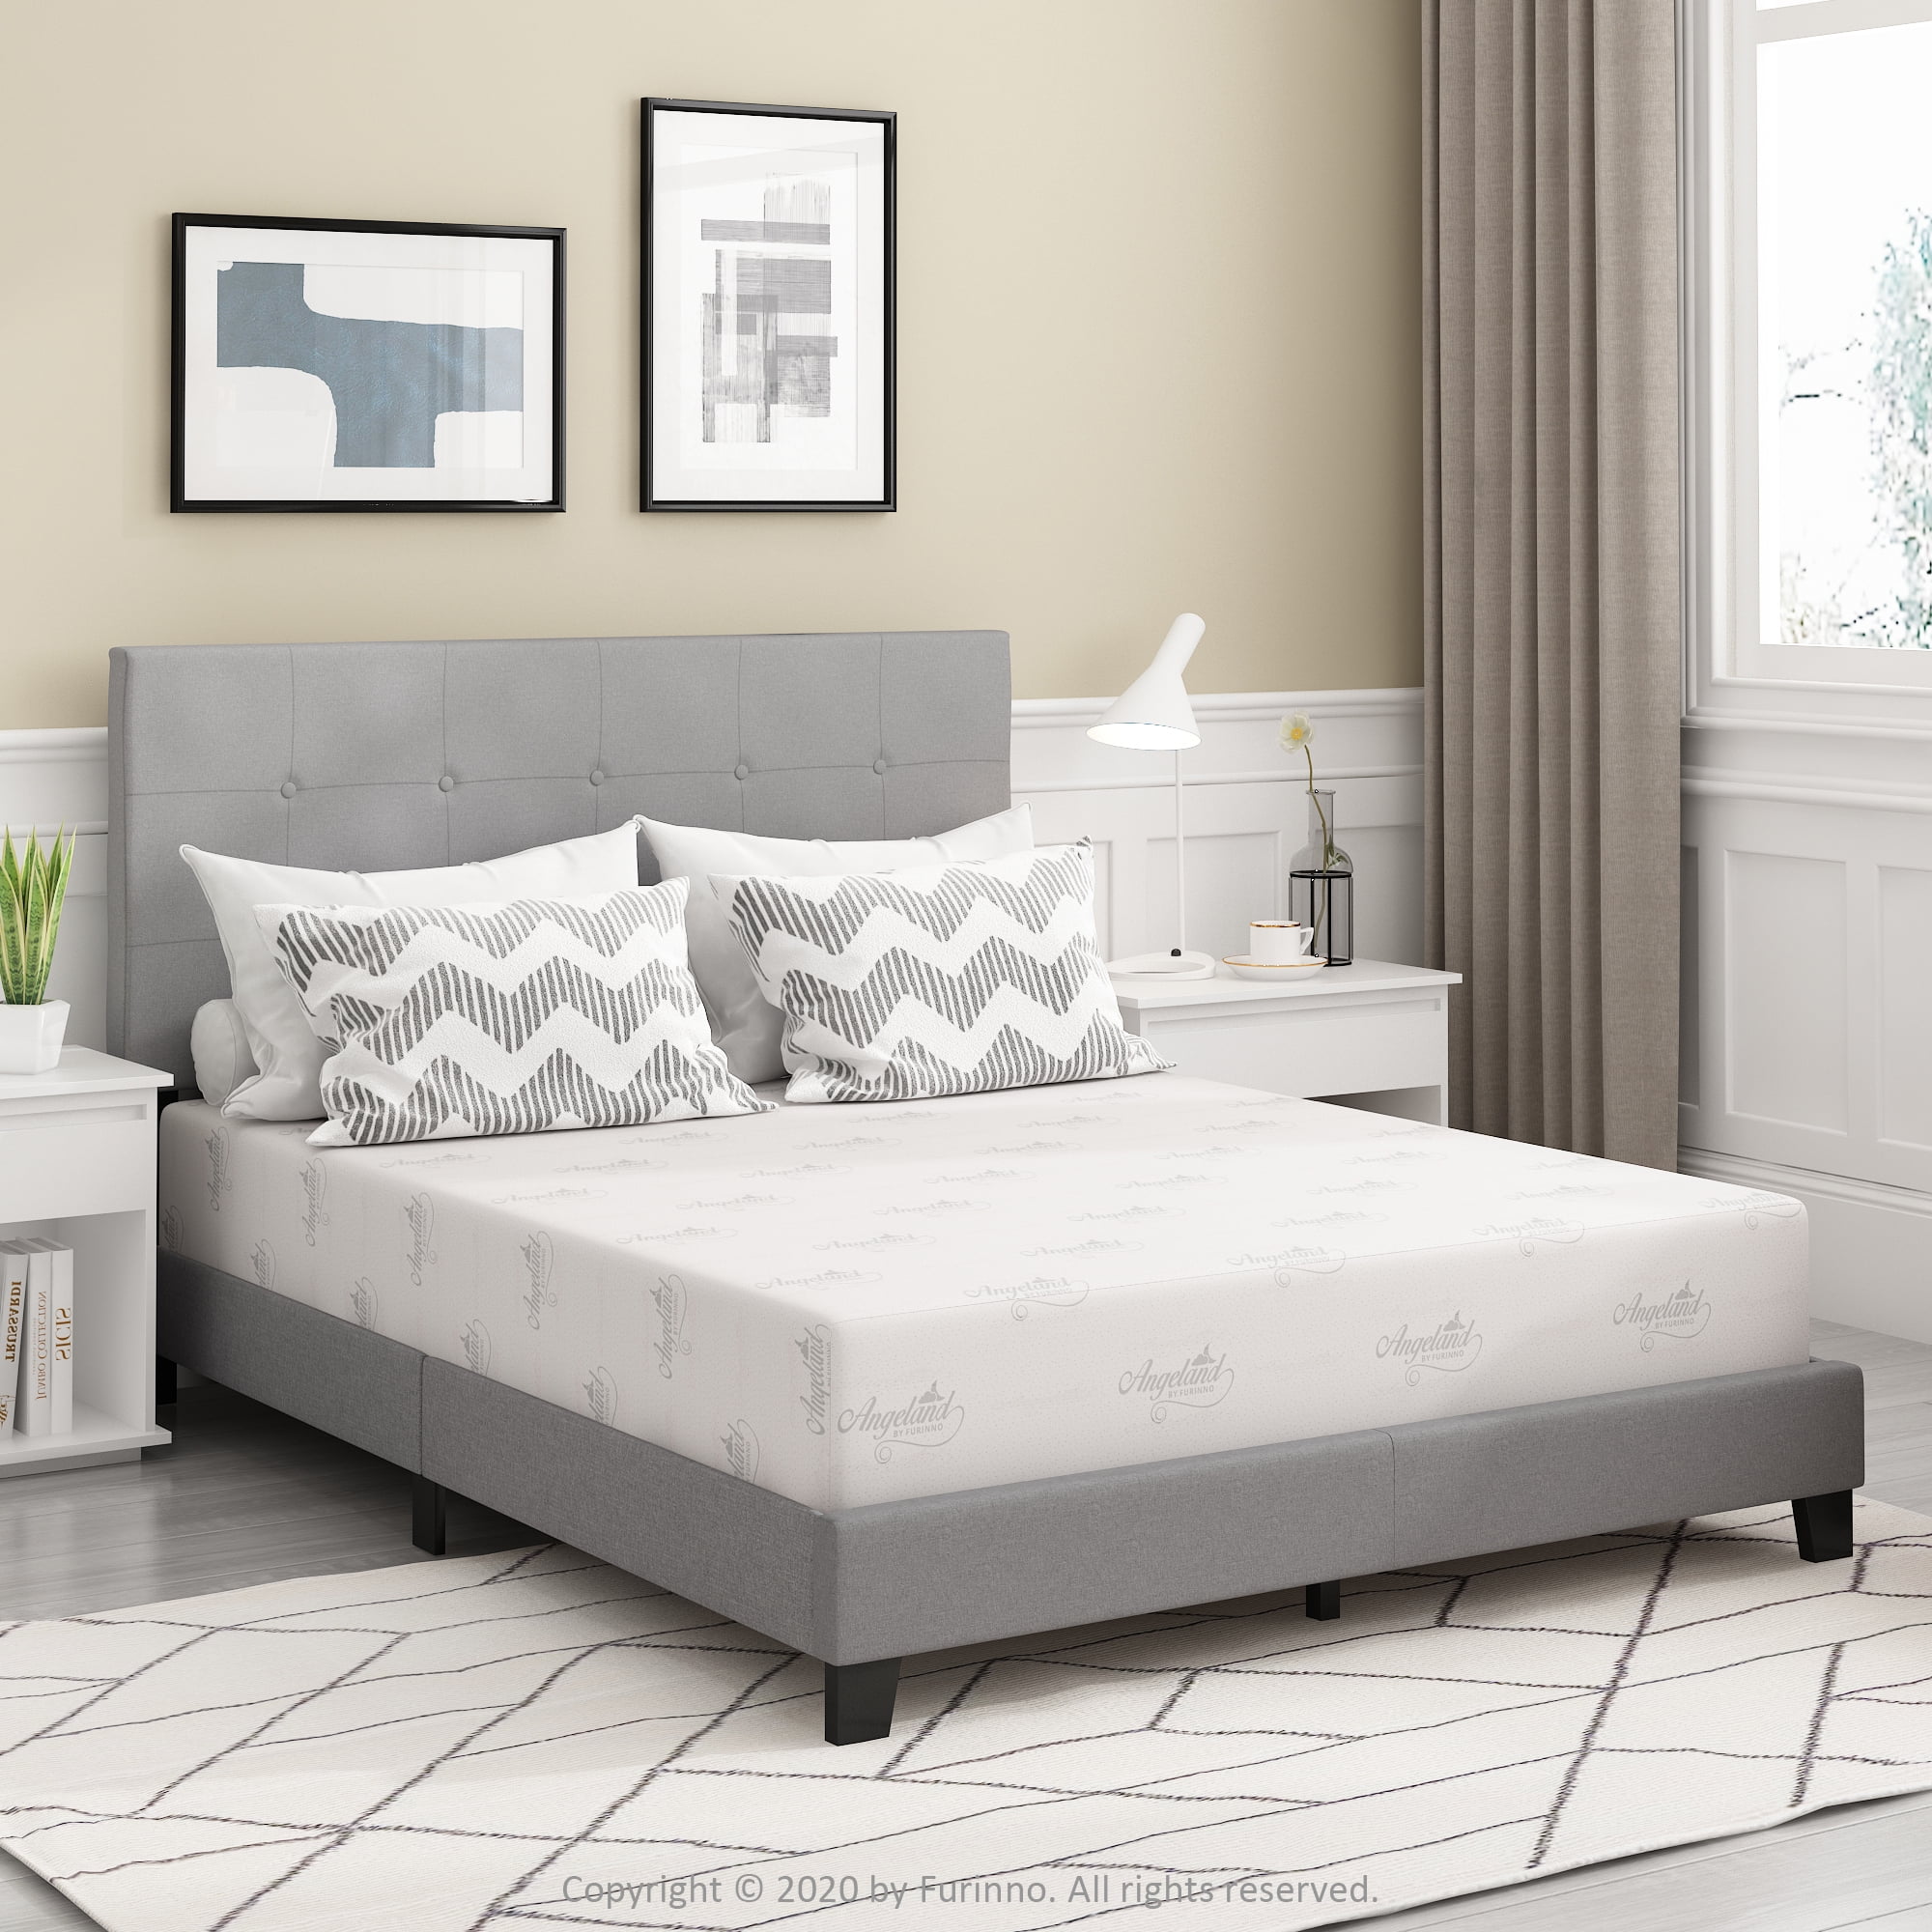 Green-Tea and Charcoal-Infused CertiPUR-US Certified Details about   Memory Foam Mattress 